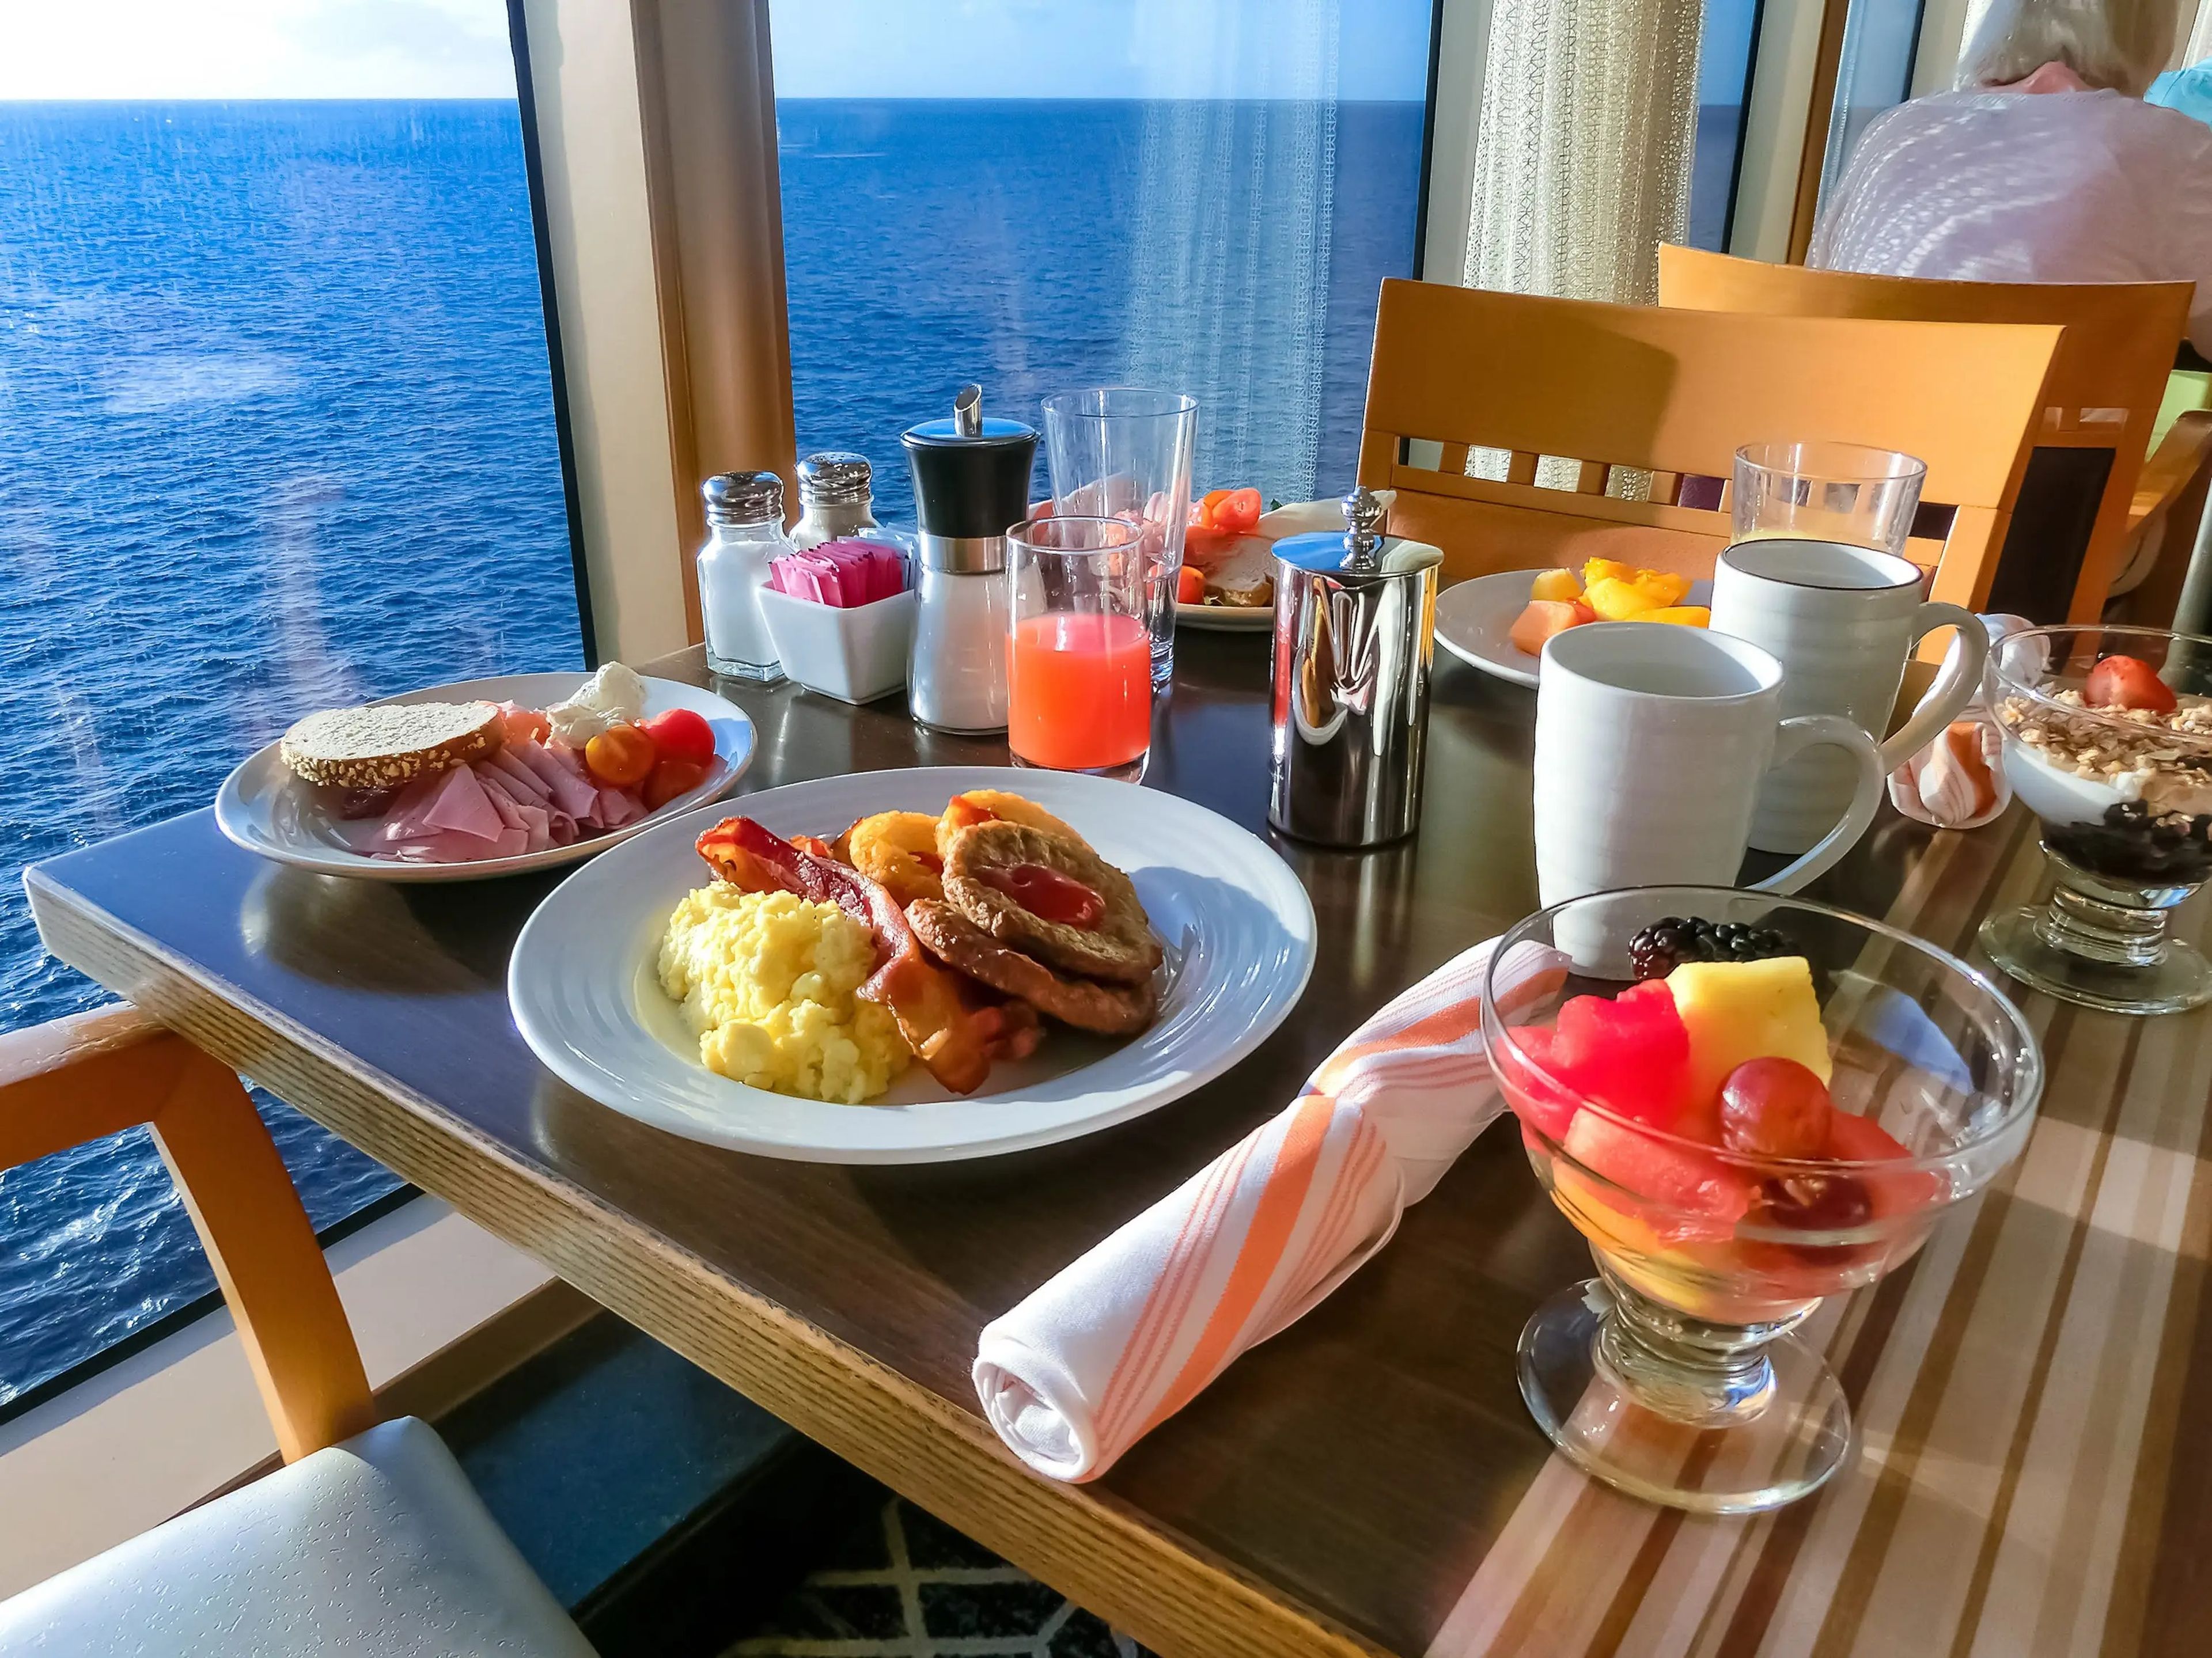 Buffet food on wooden table with ocean view on cruise ship